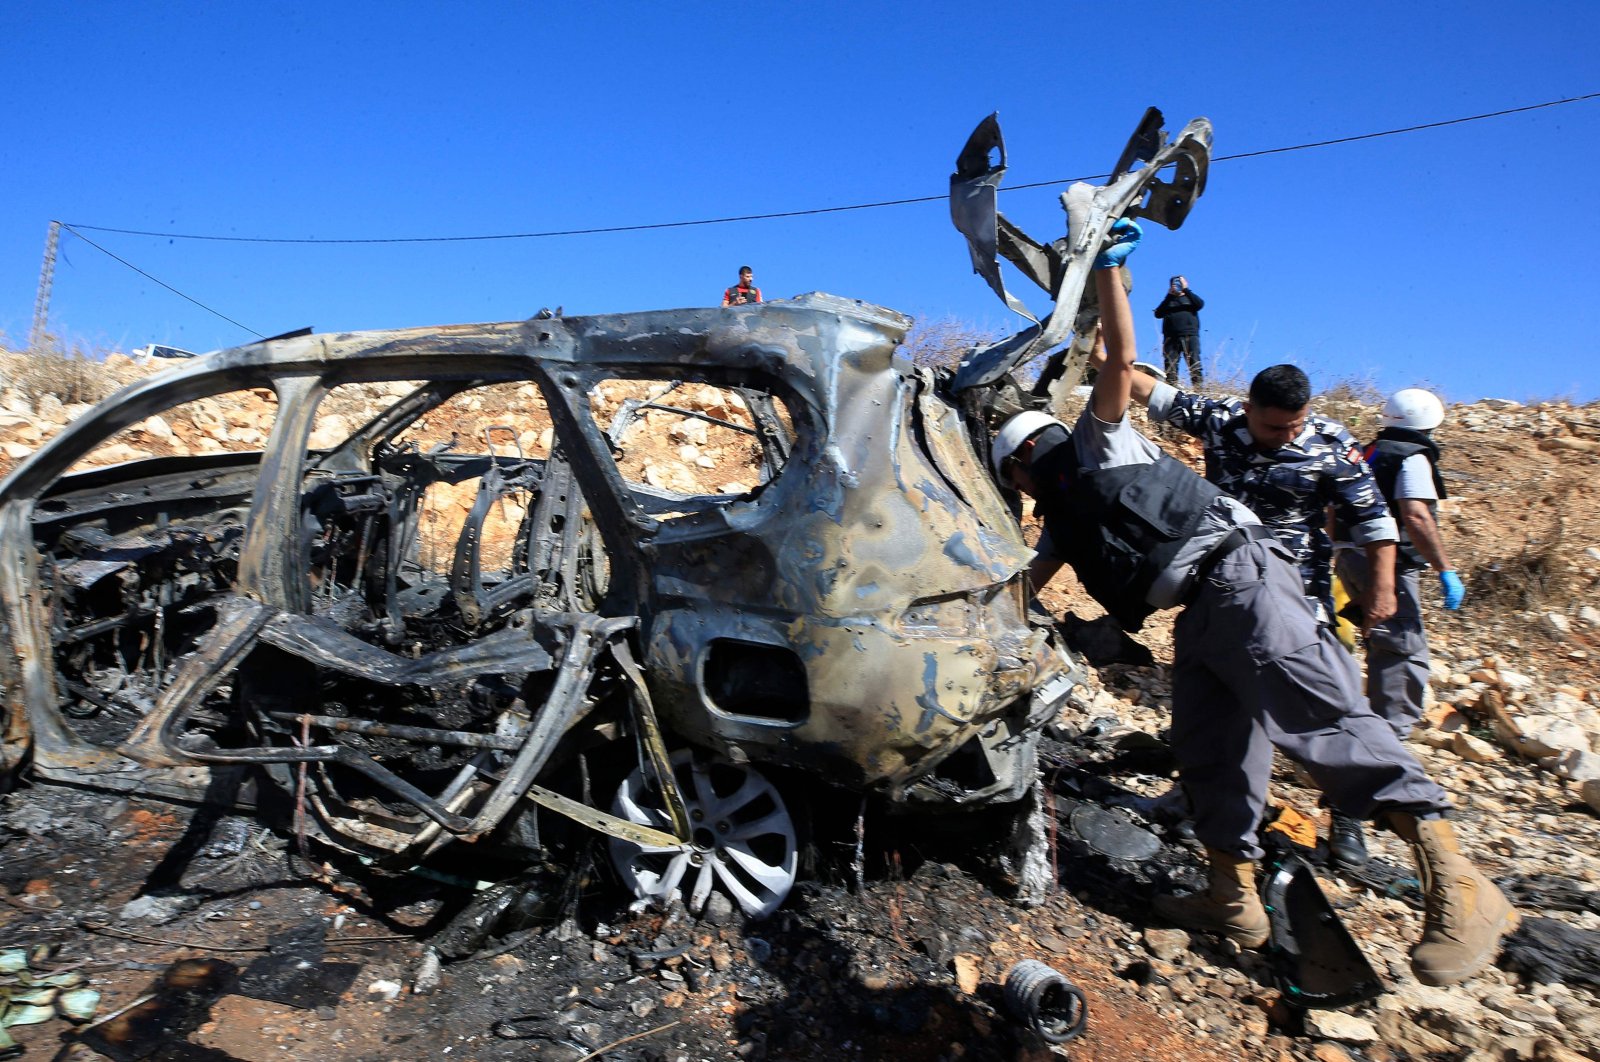 Rescuers from Hezbollah&#039;s Islamic Sanitary committee inspect the wreckage of a vehicle in which civilians were killed during an Israeli strike in southern Lebanon near the border with Israel, on Nov. 6, 2023. (AFP Photo)